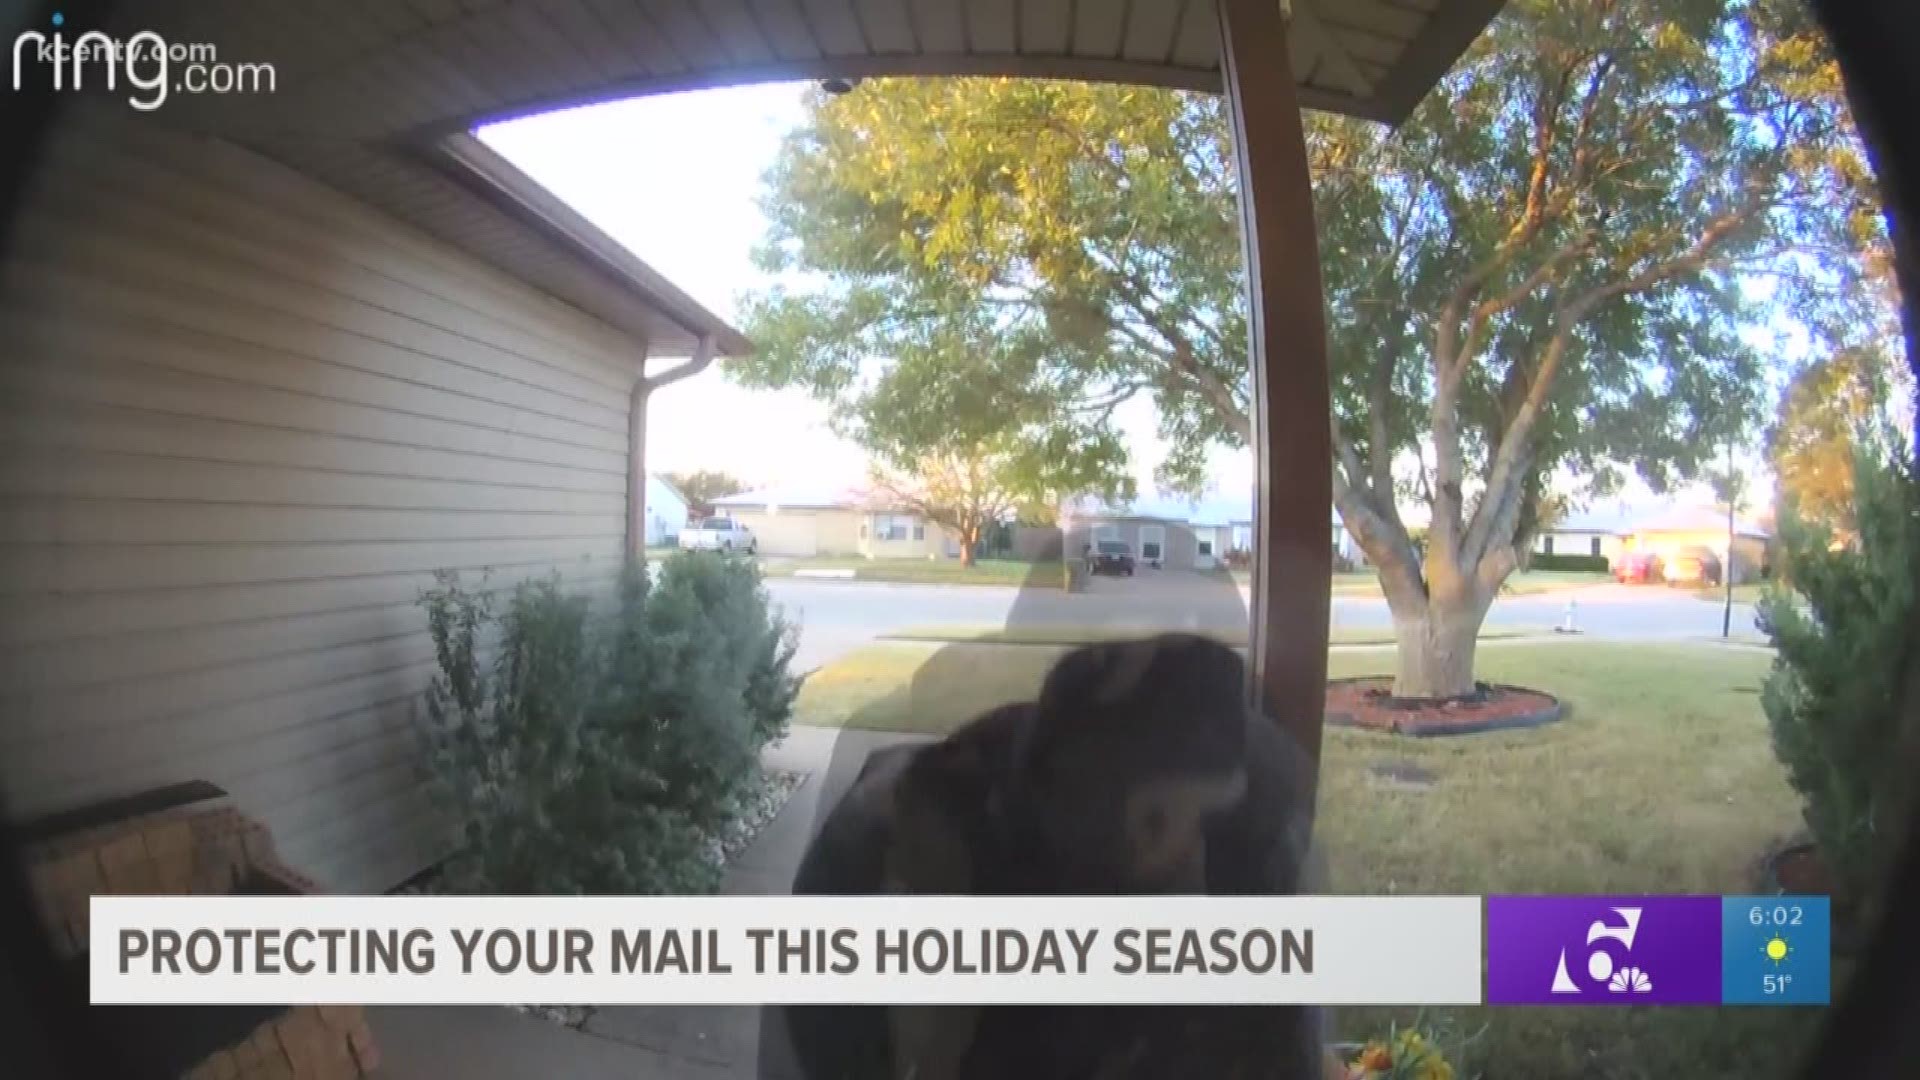 Channel 6 reporter Cole Johnson spoke to local police and postal workers on how to protect packages from thieves this holiday season.